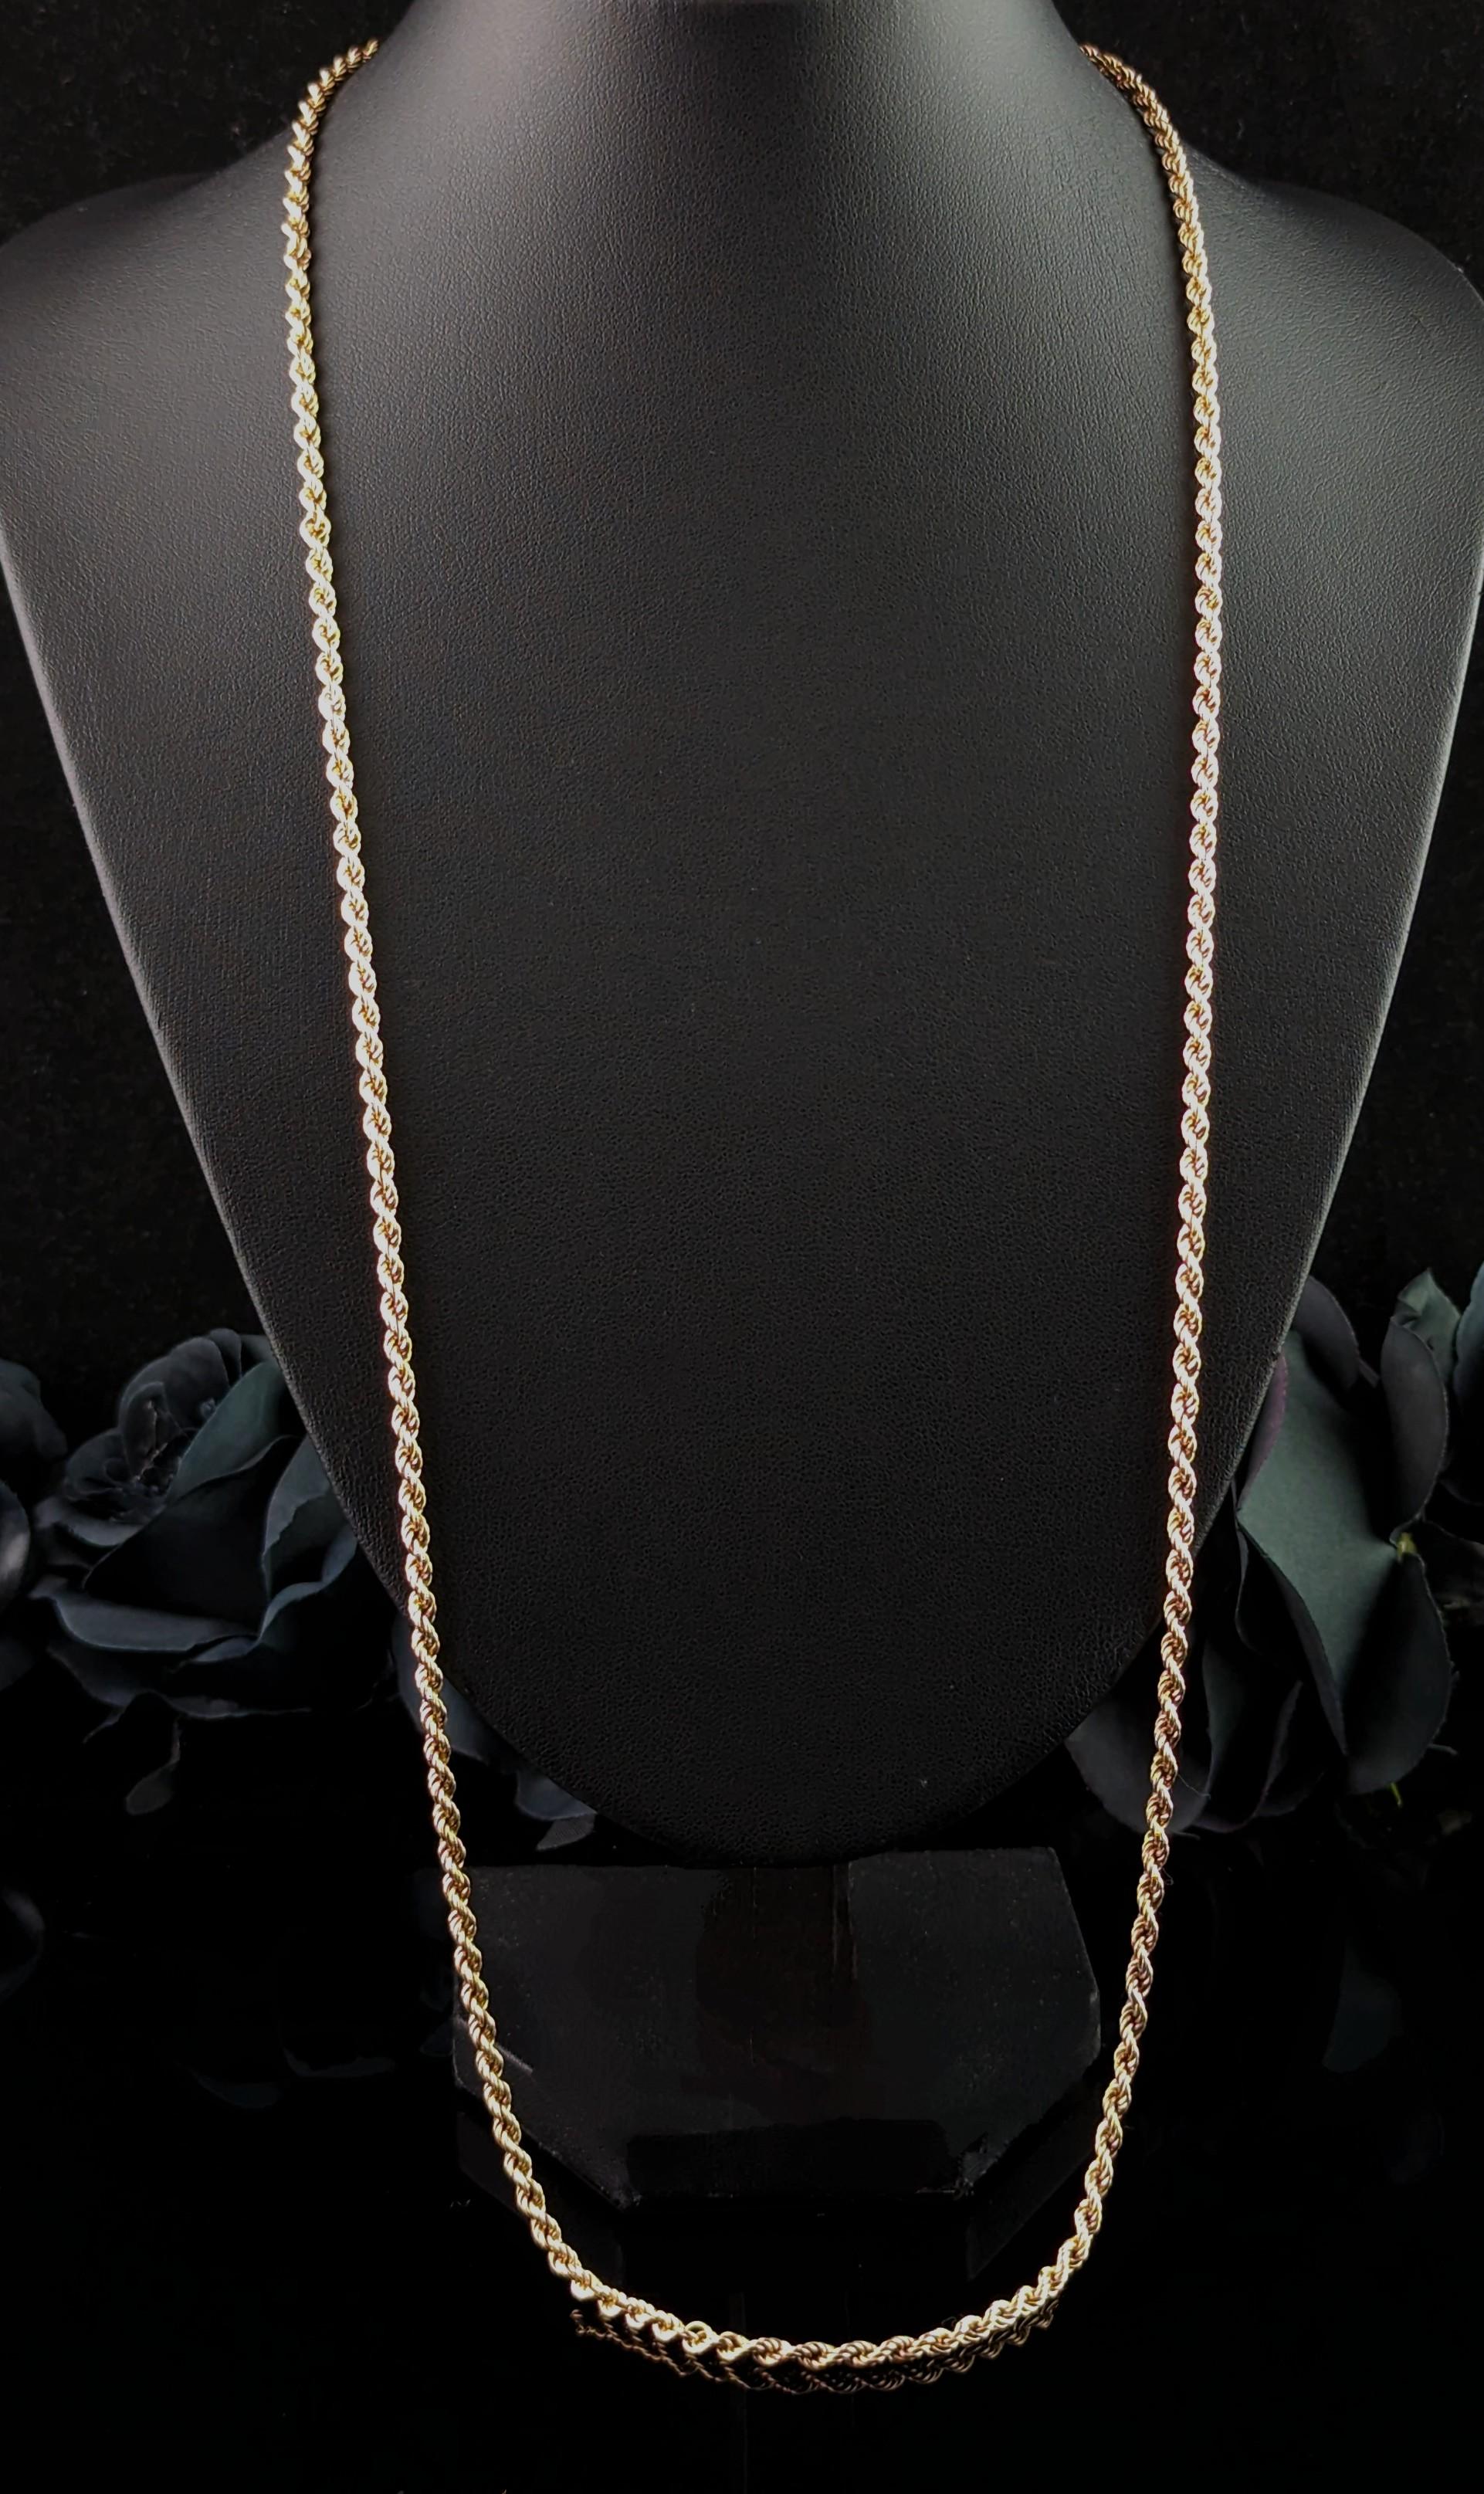 Vintage 9k Gold Rope Twist Chain Necklace, Long  5